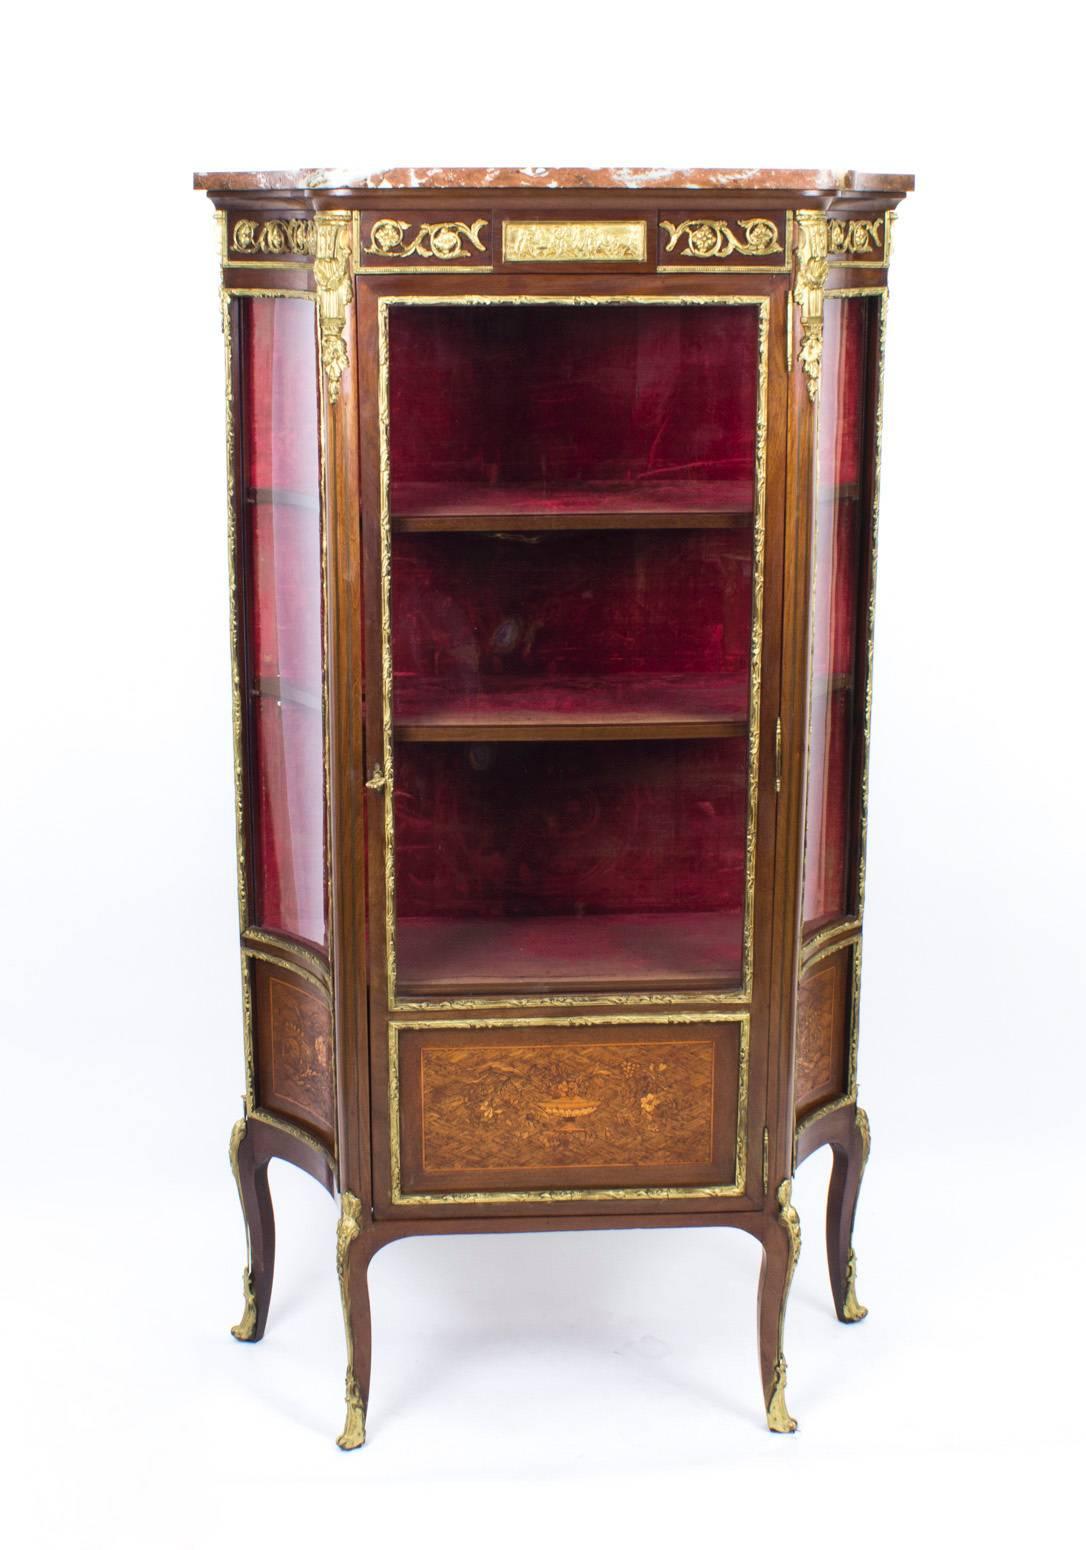 19th Century French Louis Revival Parquetry Display Cabinet For Sale 1